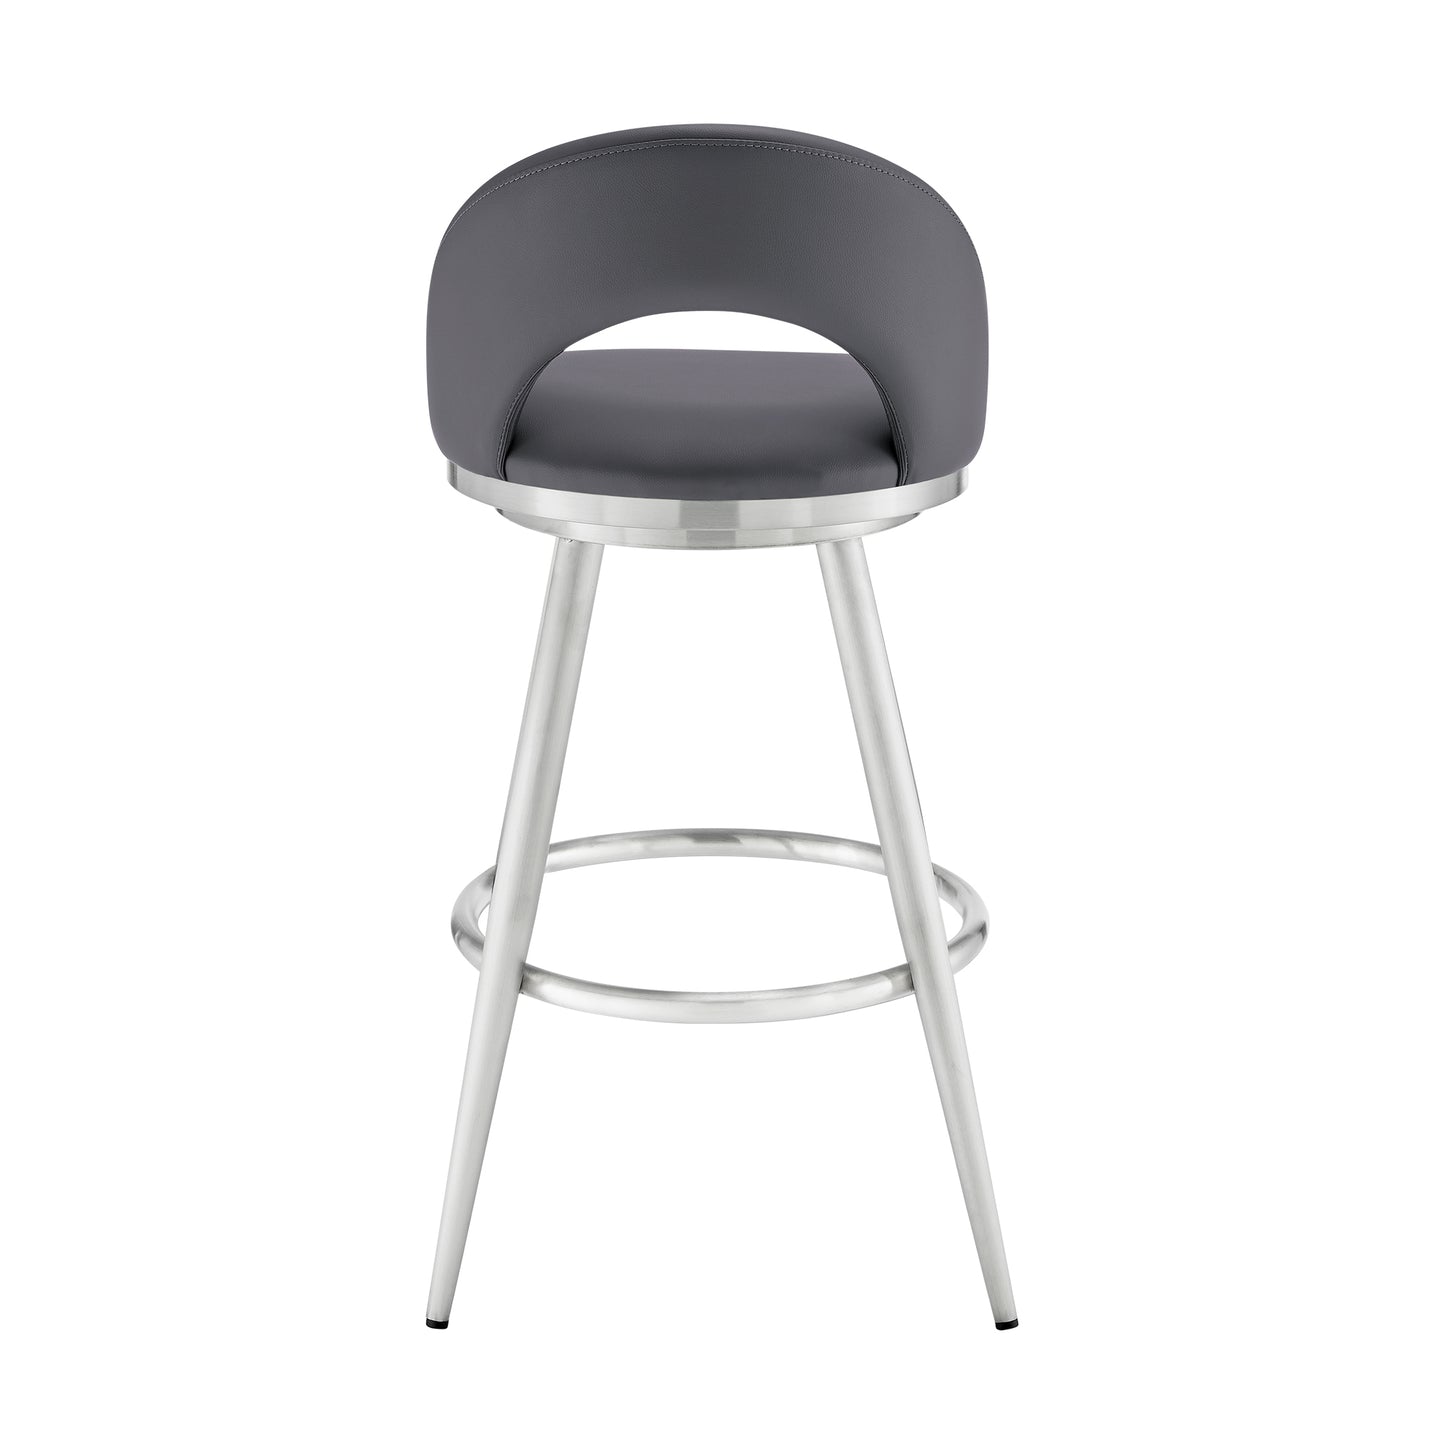 Charlotte 30" Swivel Bar Stool in Brushed Stainless Steel with Gray Faux Leather